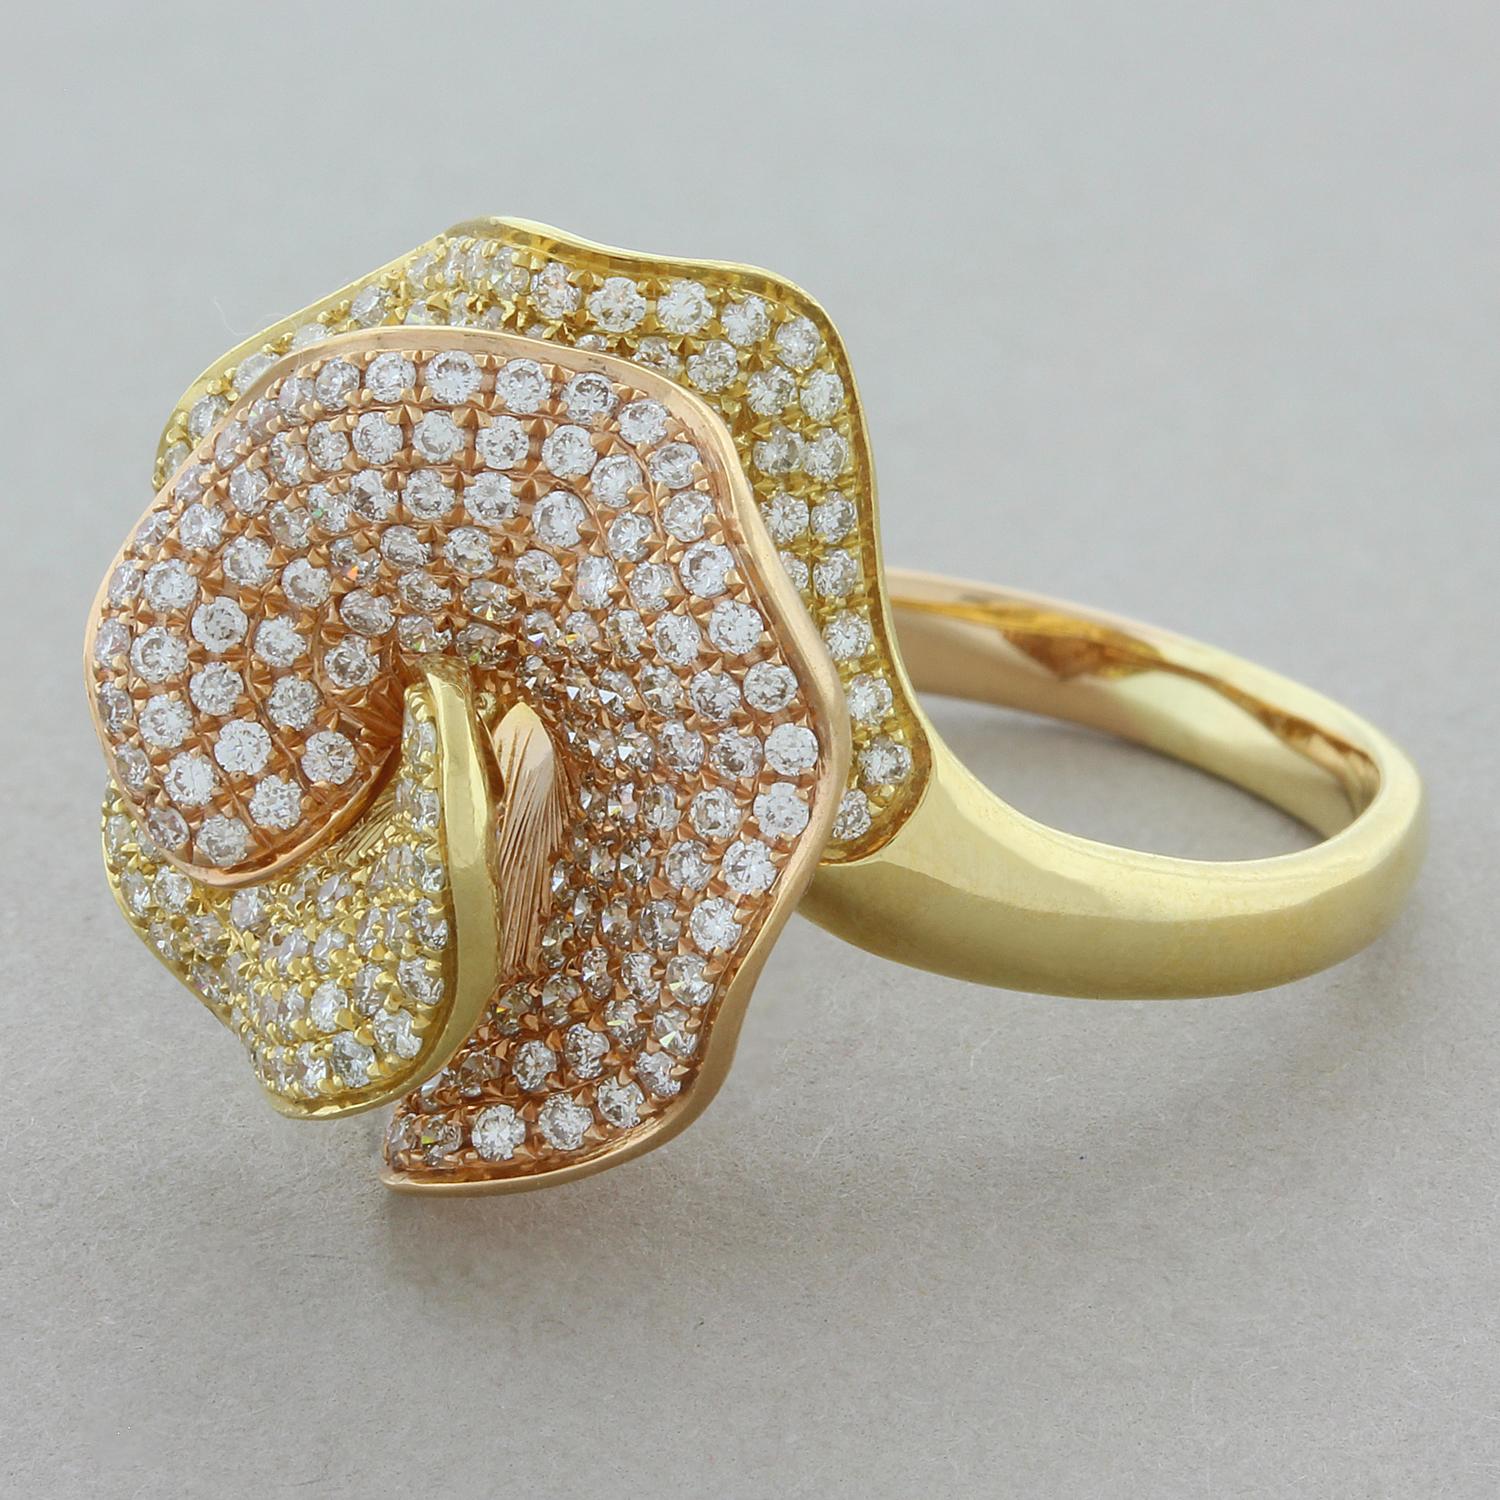 This delicately made flower ring features 1.60 carats of pave set round brilliant cut diamonds. The two flower pedals are made of 18K gold, one in yellow gold and the other in a soft rose gold giving the piece a unique twist.

Ring Size 6.75